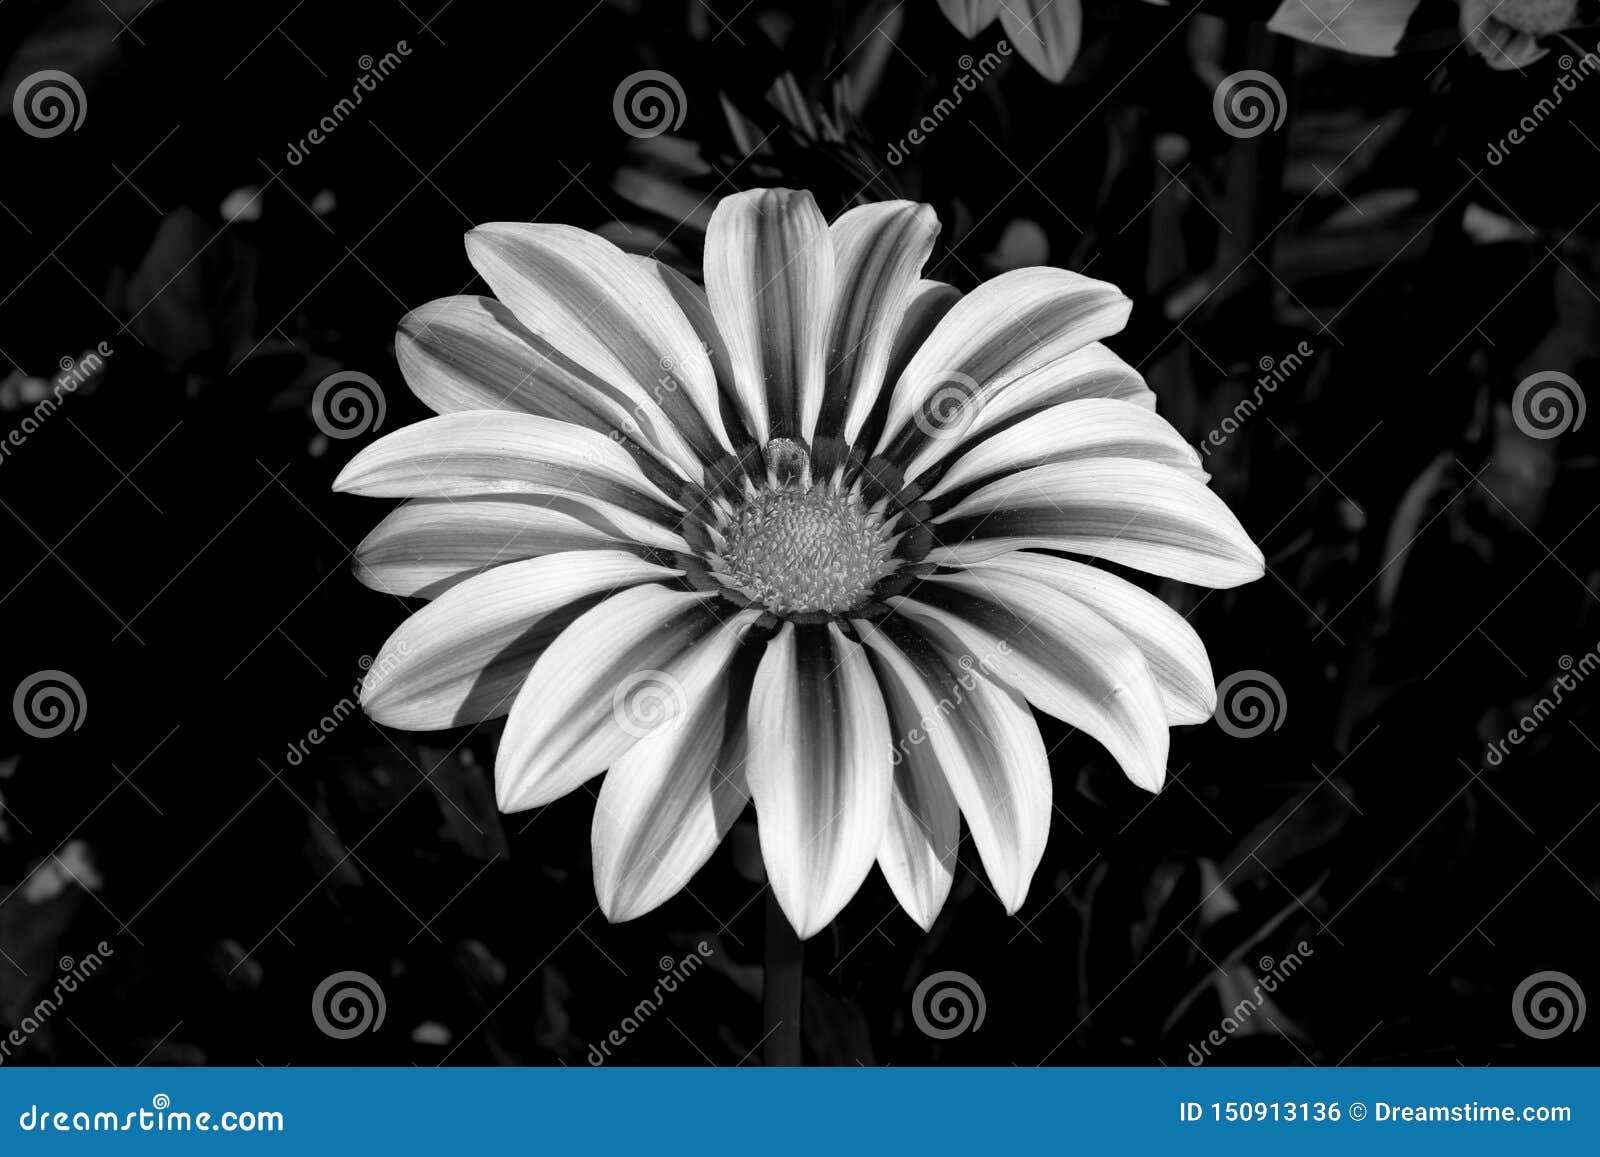 Black and White Flower stock photo. Image of spring - 150913136